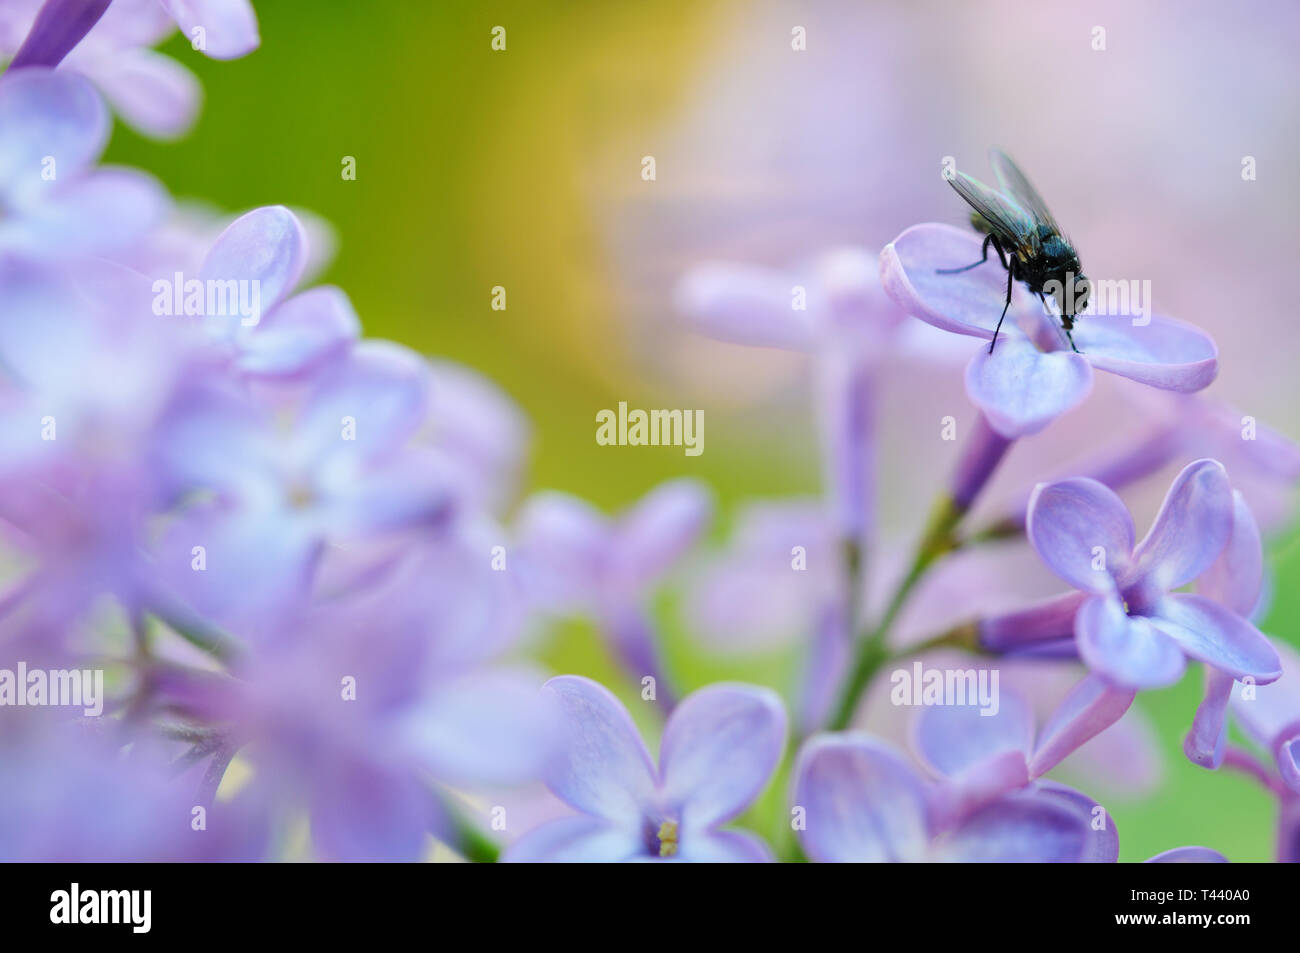 Fly on a lilac flower. Shallow depth of field. Focus on fly head and back Stock Photo